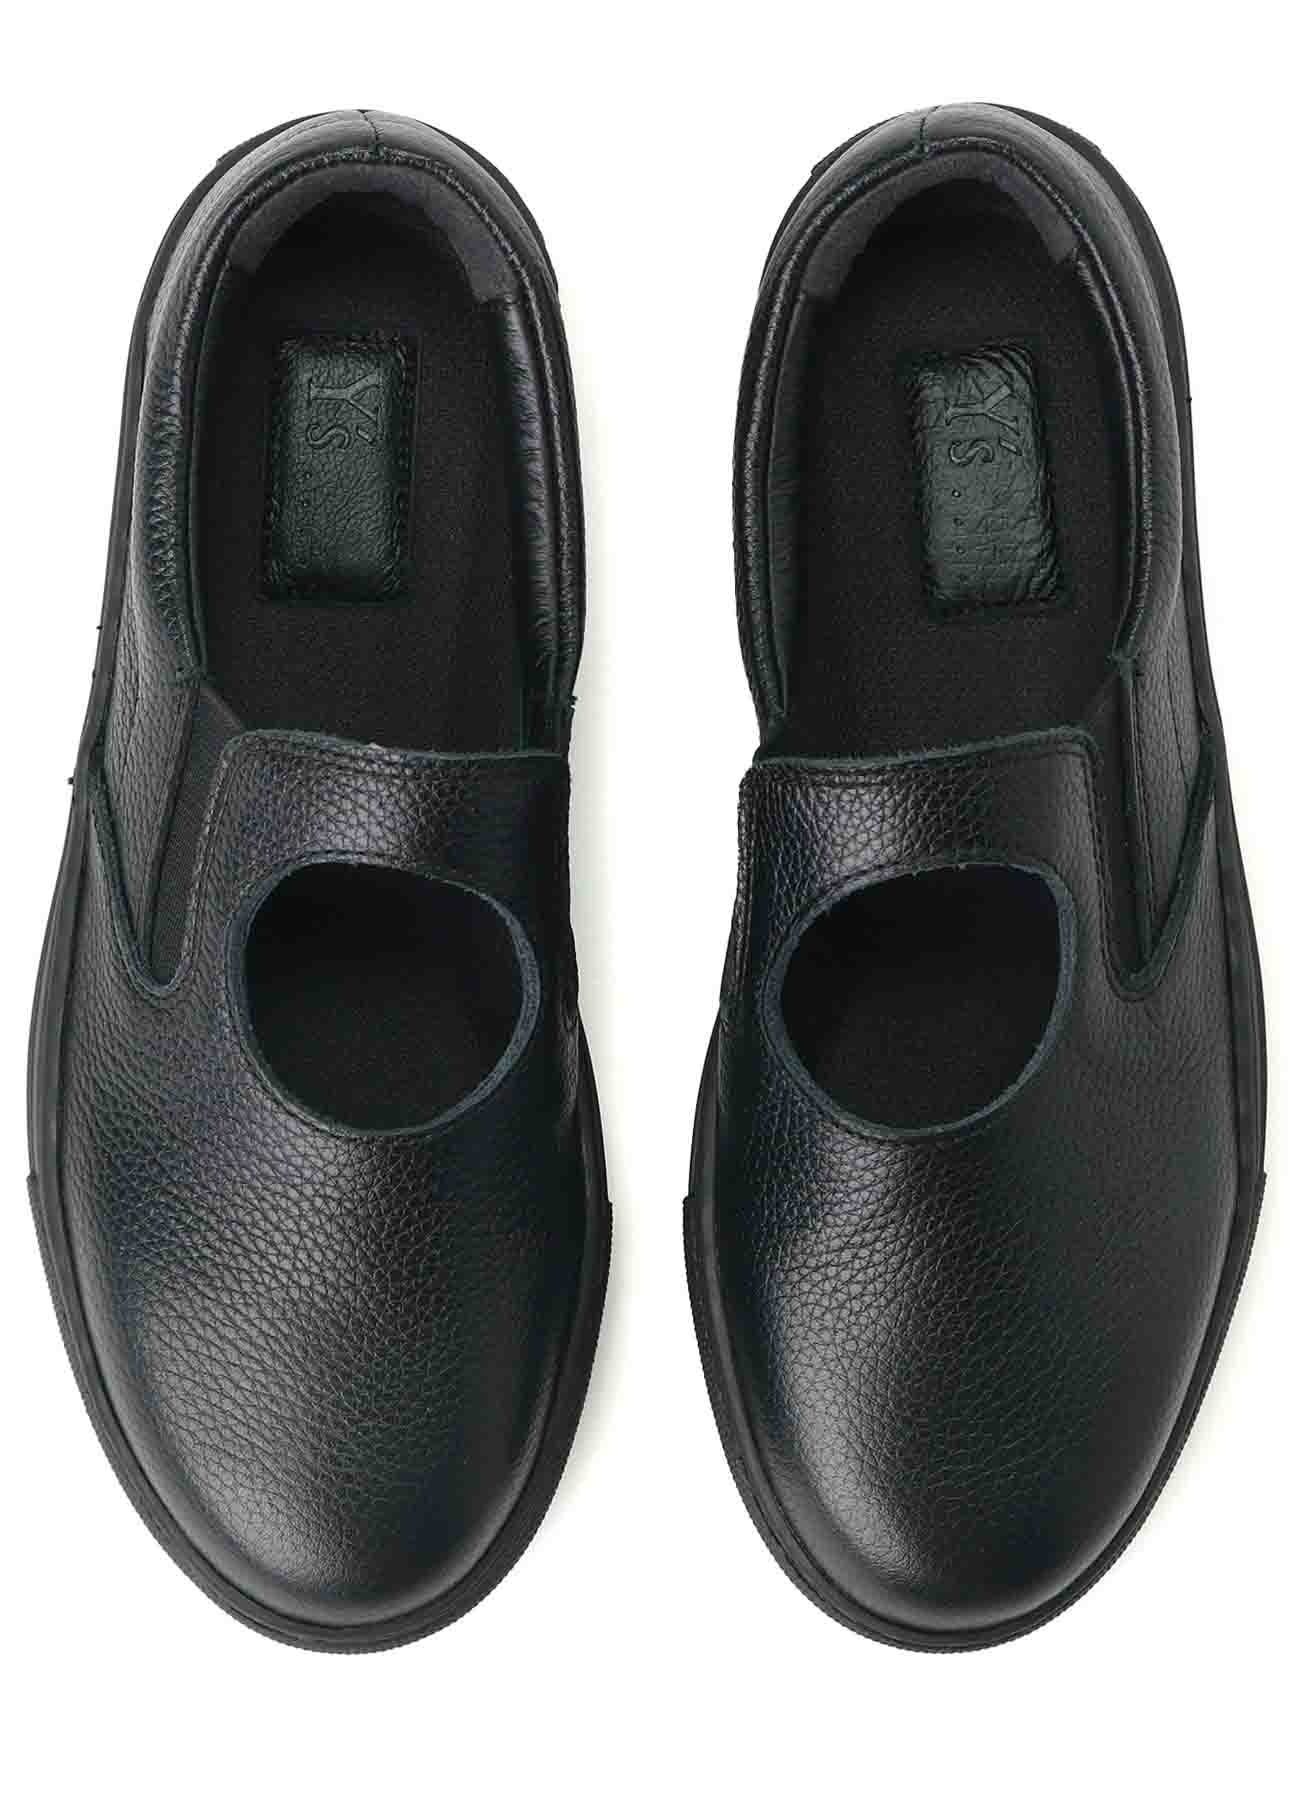 COW LEATHER SLIP-ON